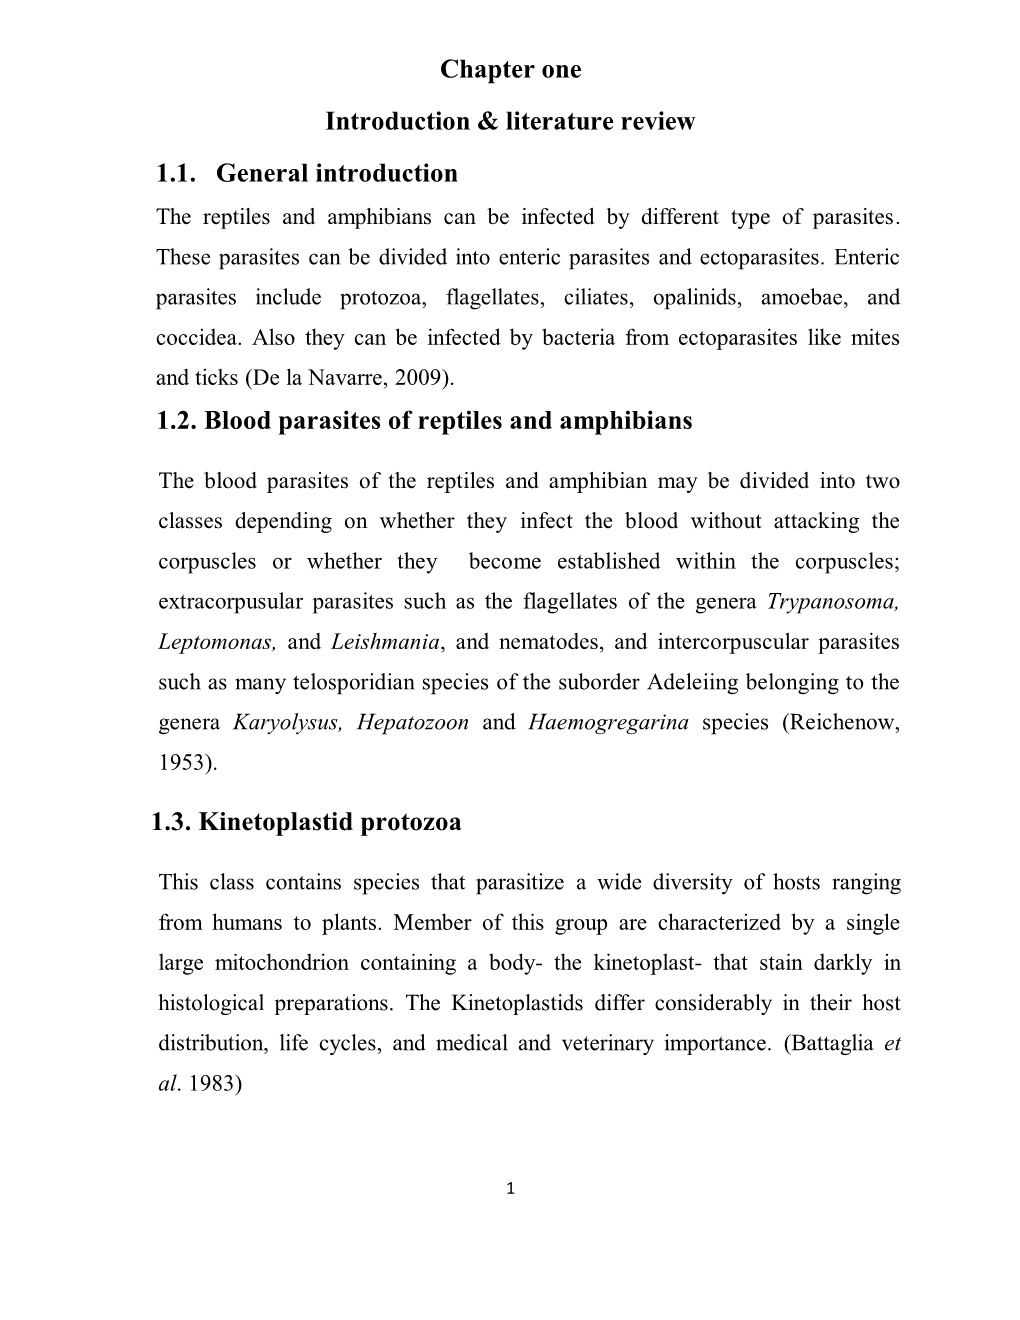 Chapter One Introduction & Literature Review 1.1. General Introduction 1.2. Blood Parasites of Reptiles and Amphibians